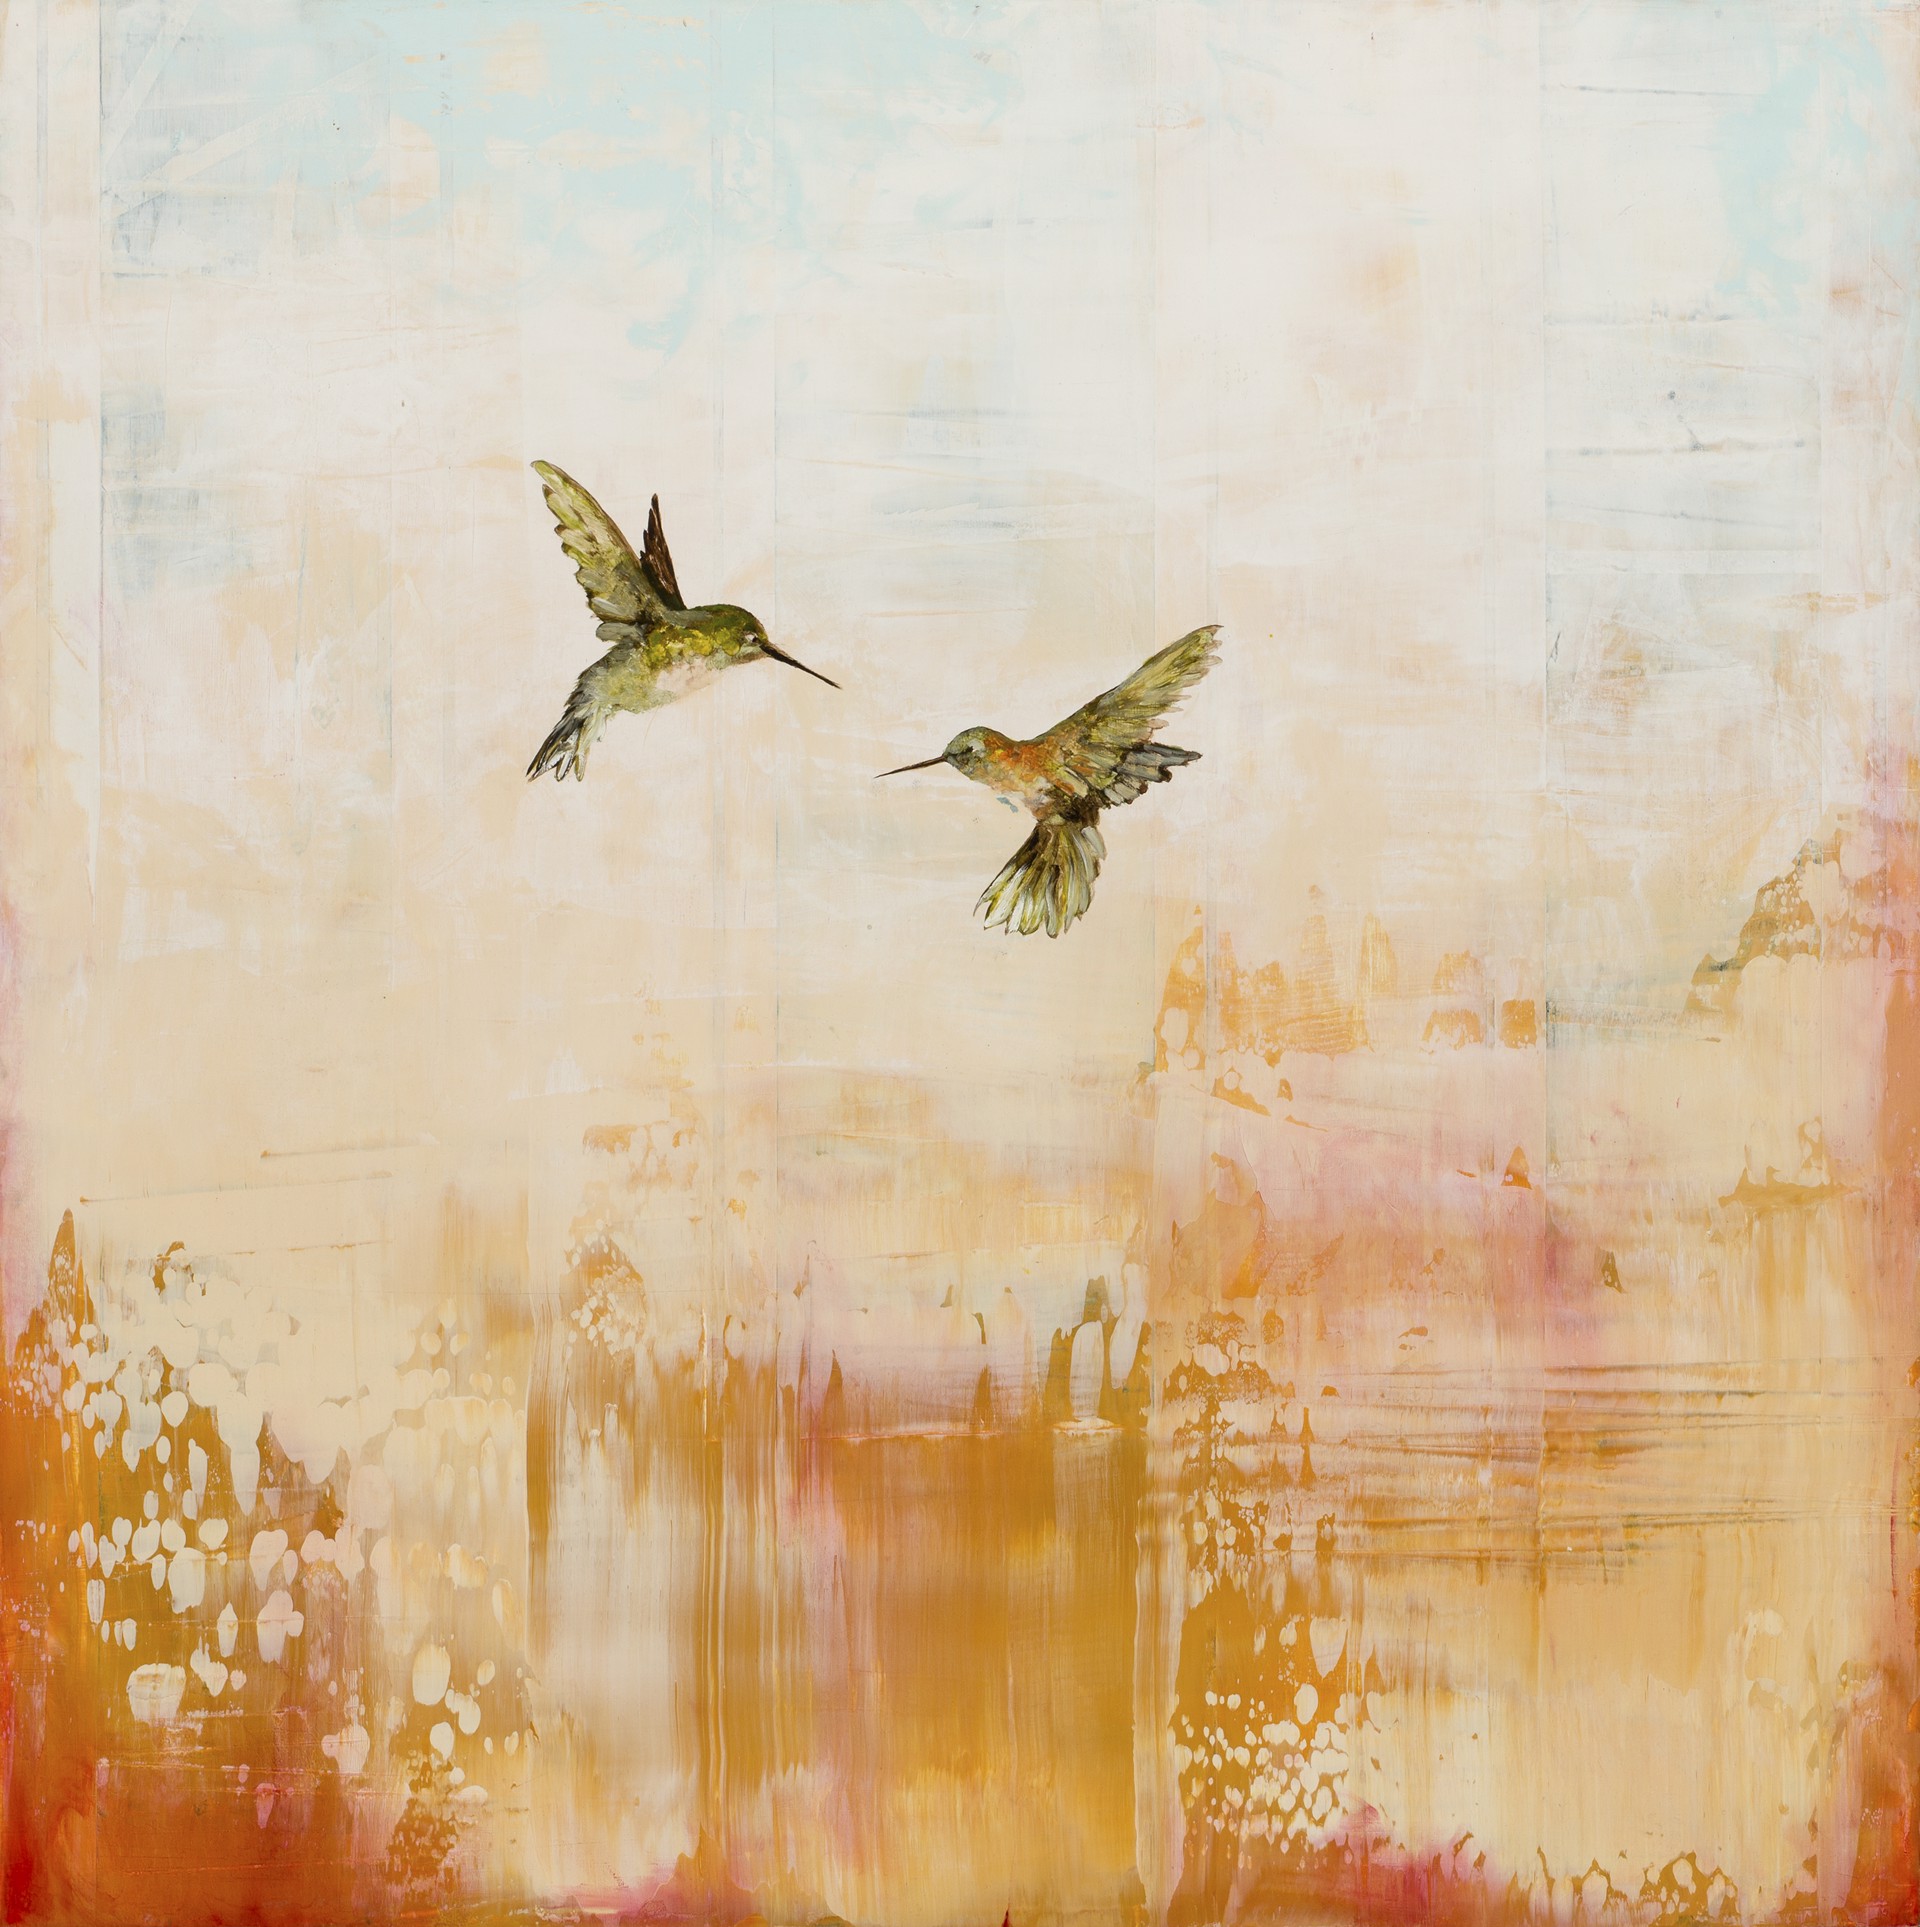 Original Oil Painting Of Two Humming Birds With An Abstract Orange And Blue Background, By Jenna Von Benedikt